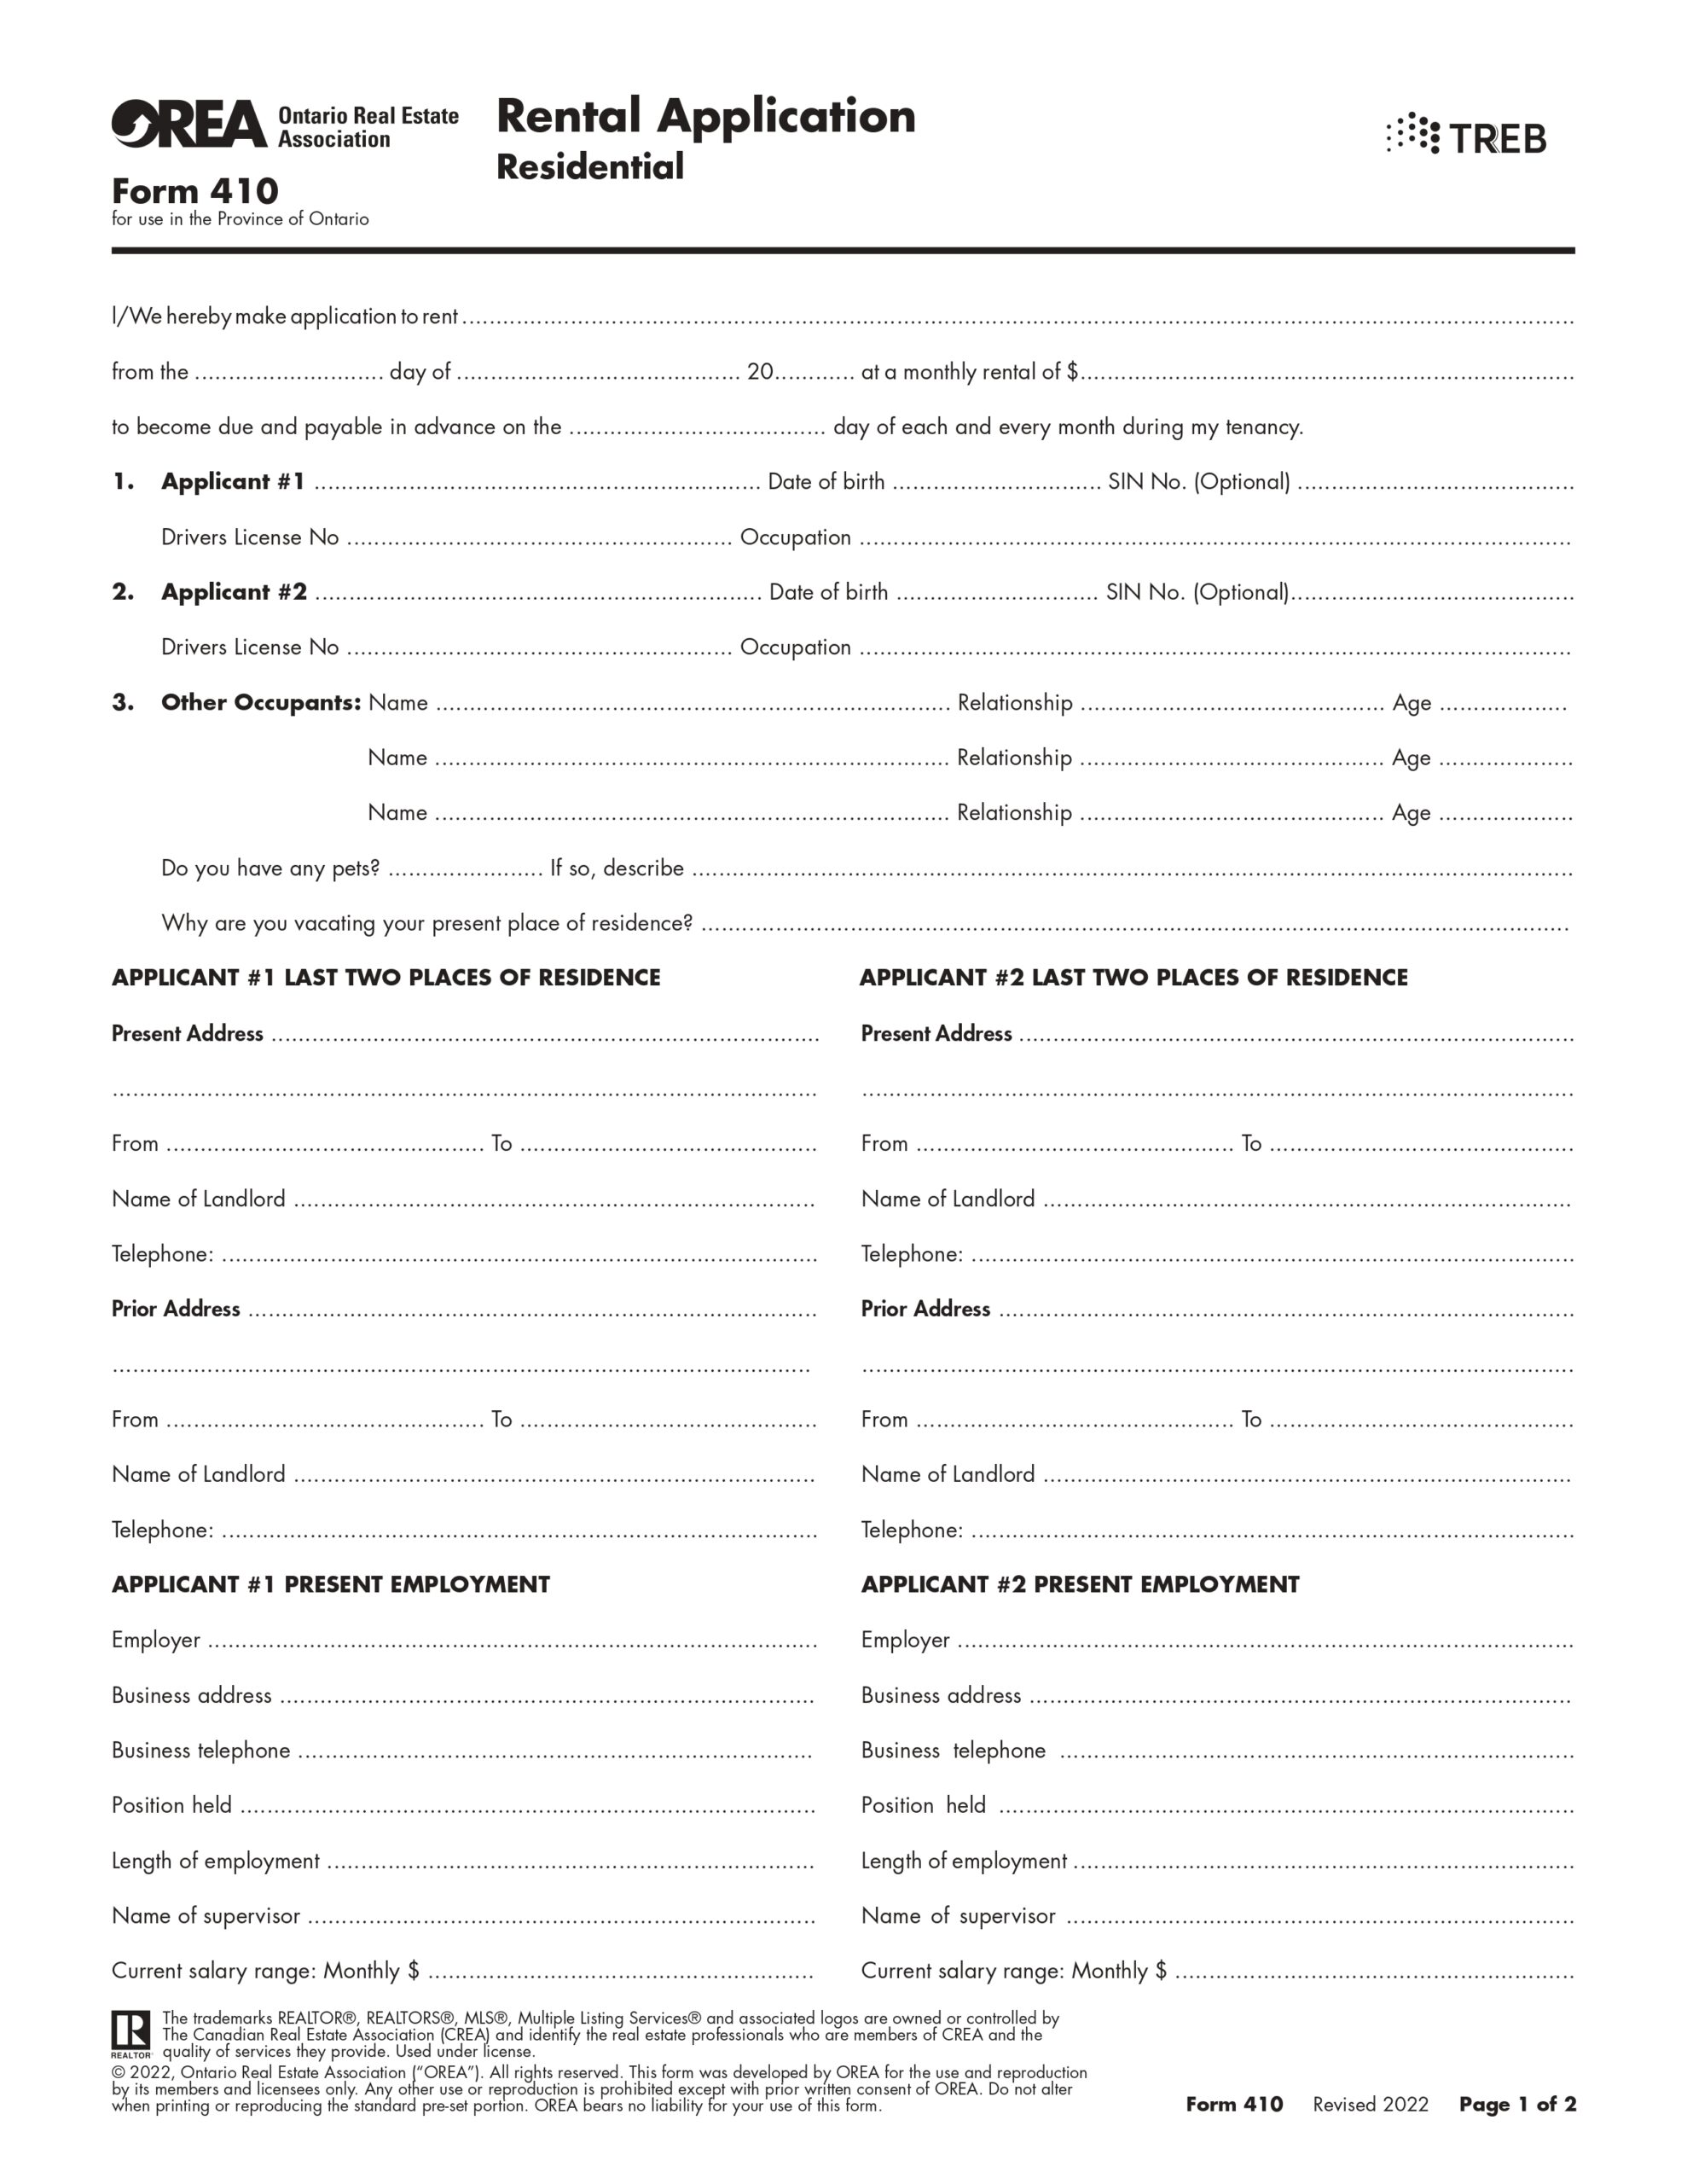 online form_page